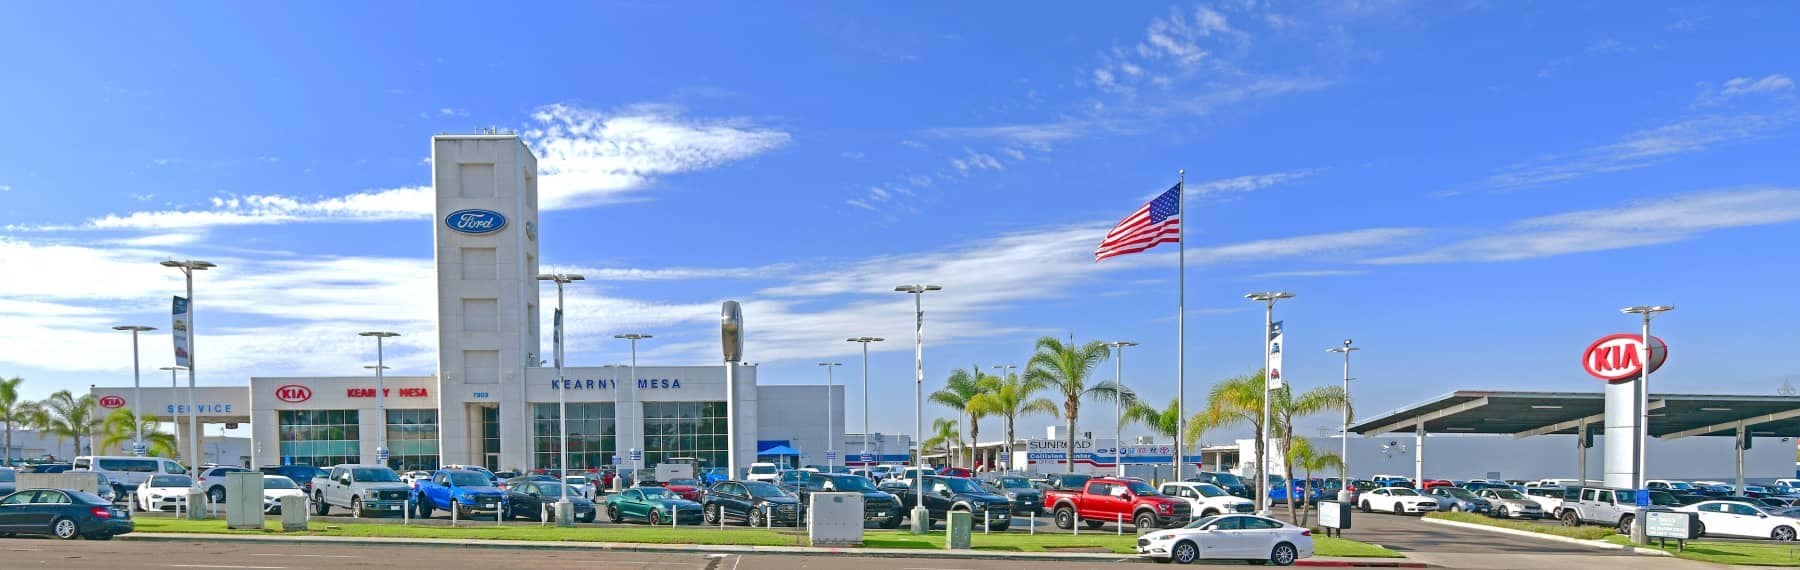 Kearny Mesa Ford Dealership during the day outside 